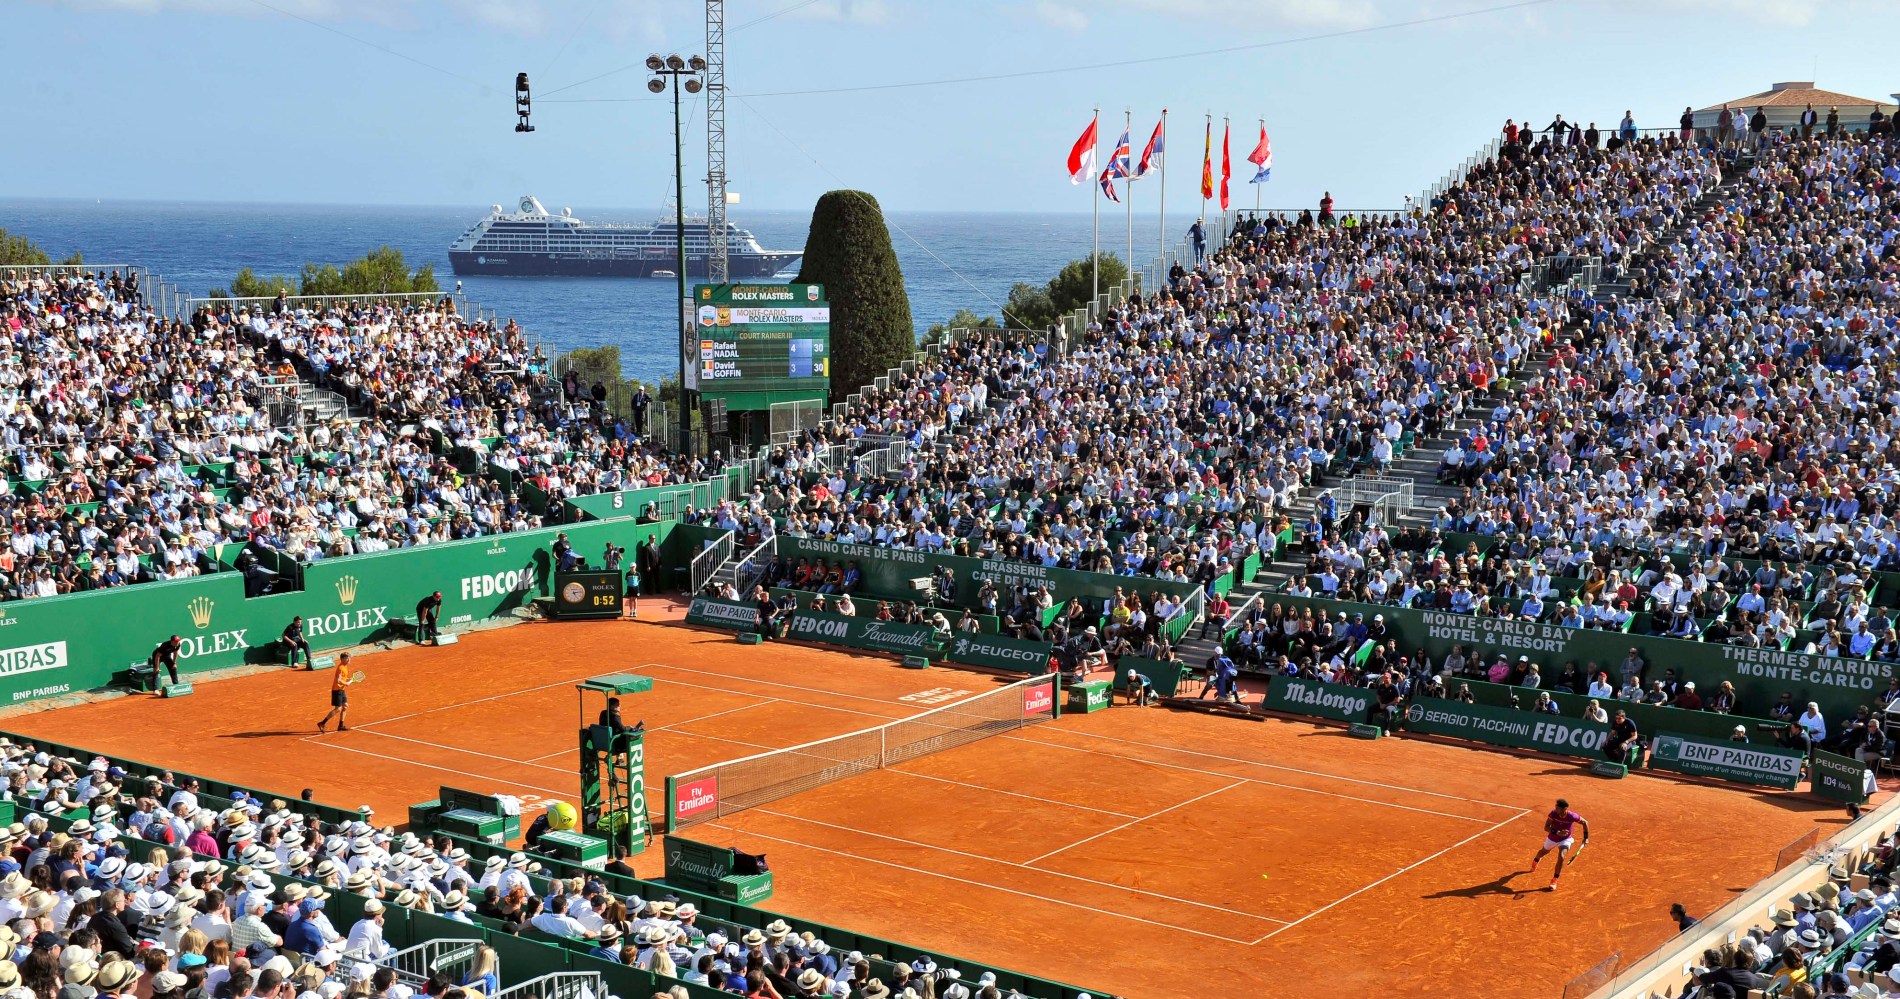 Monte Carlo centre court features a breathtaking view.